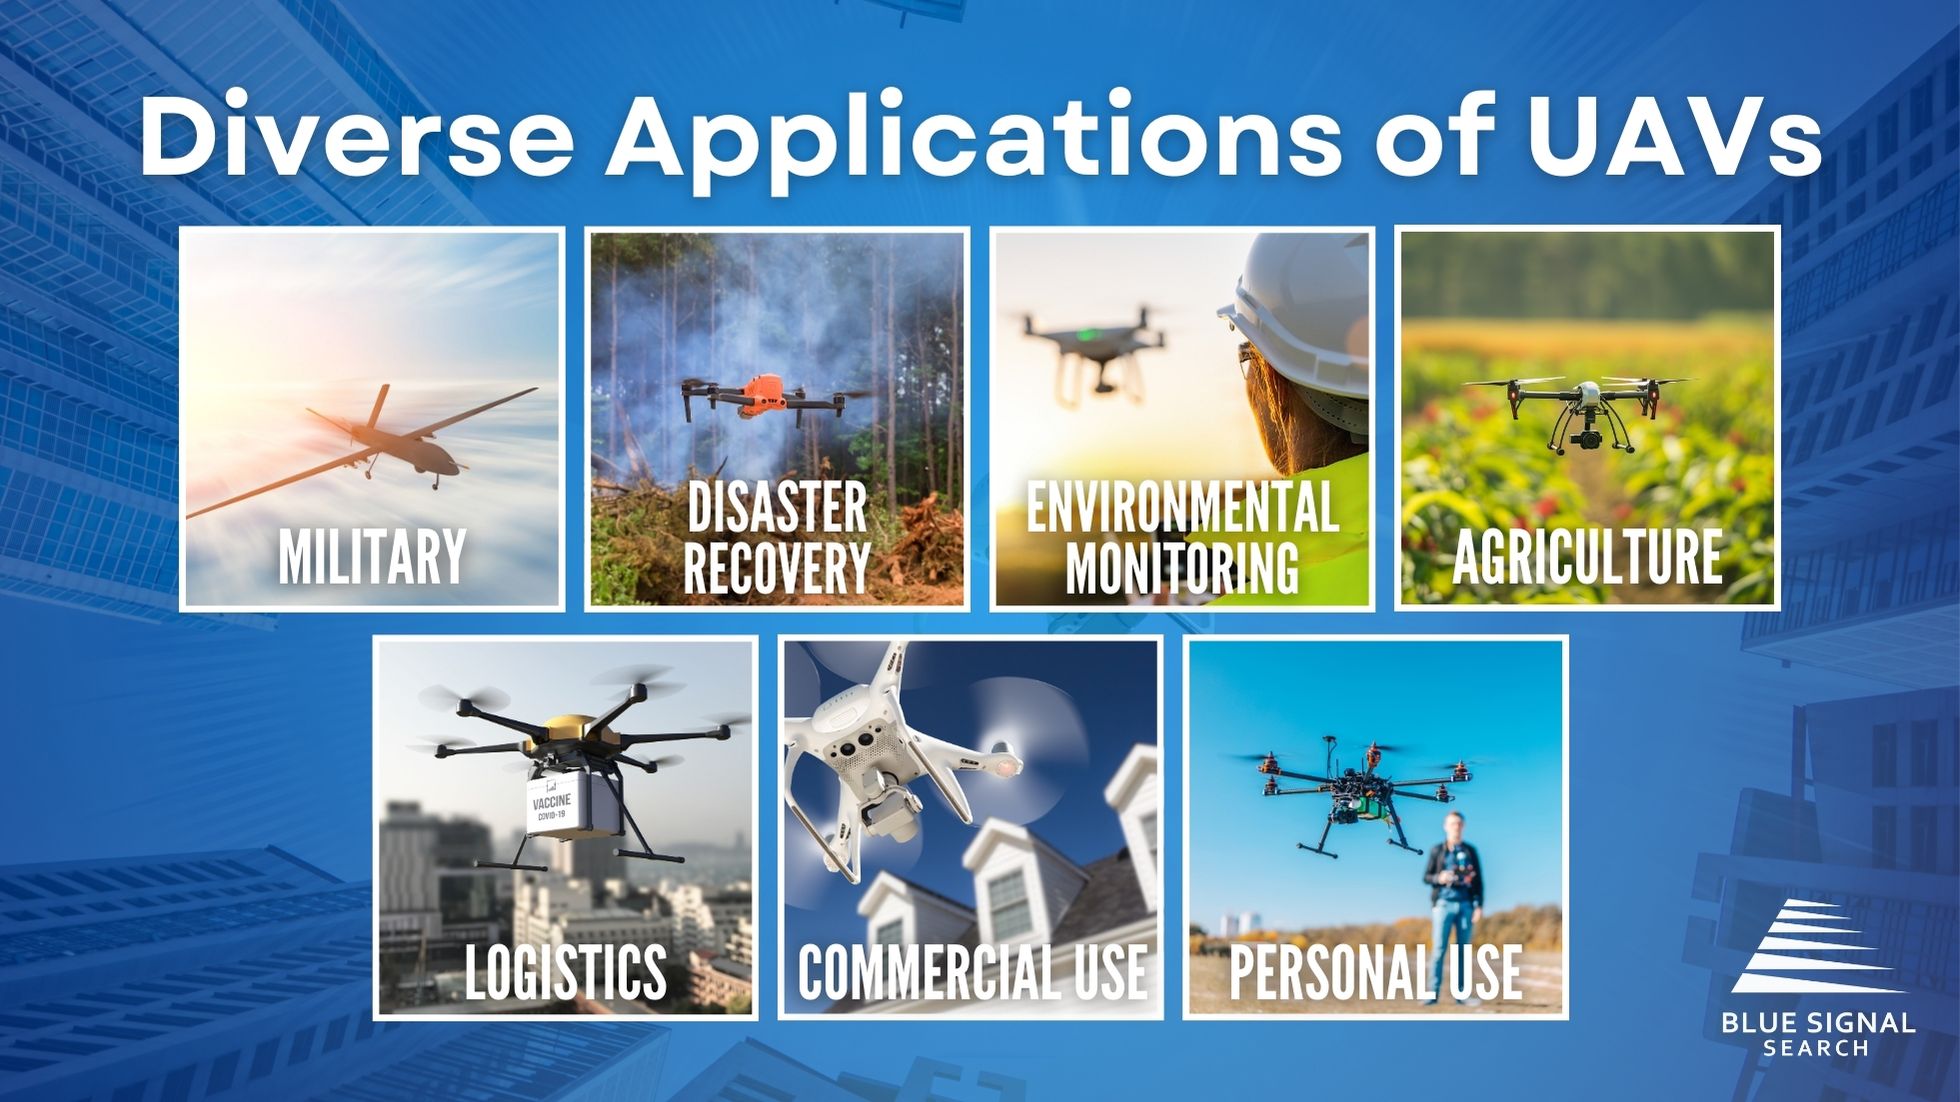 A collage of images representing diverse applications of UAVs, including military, disaster recovery, environmental monitoring, agriculture, logistics, commercial use, and personal use.